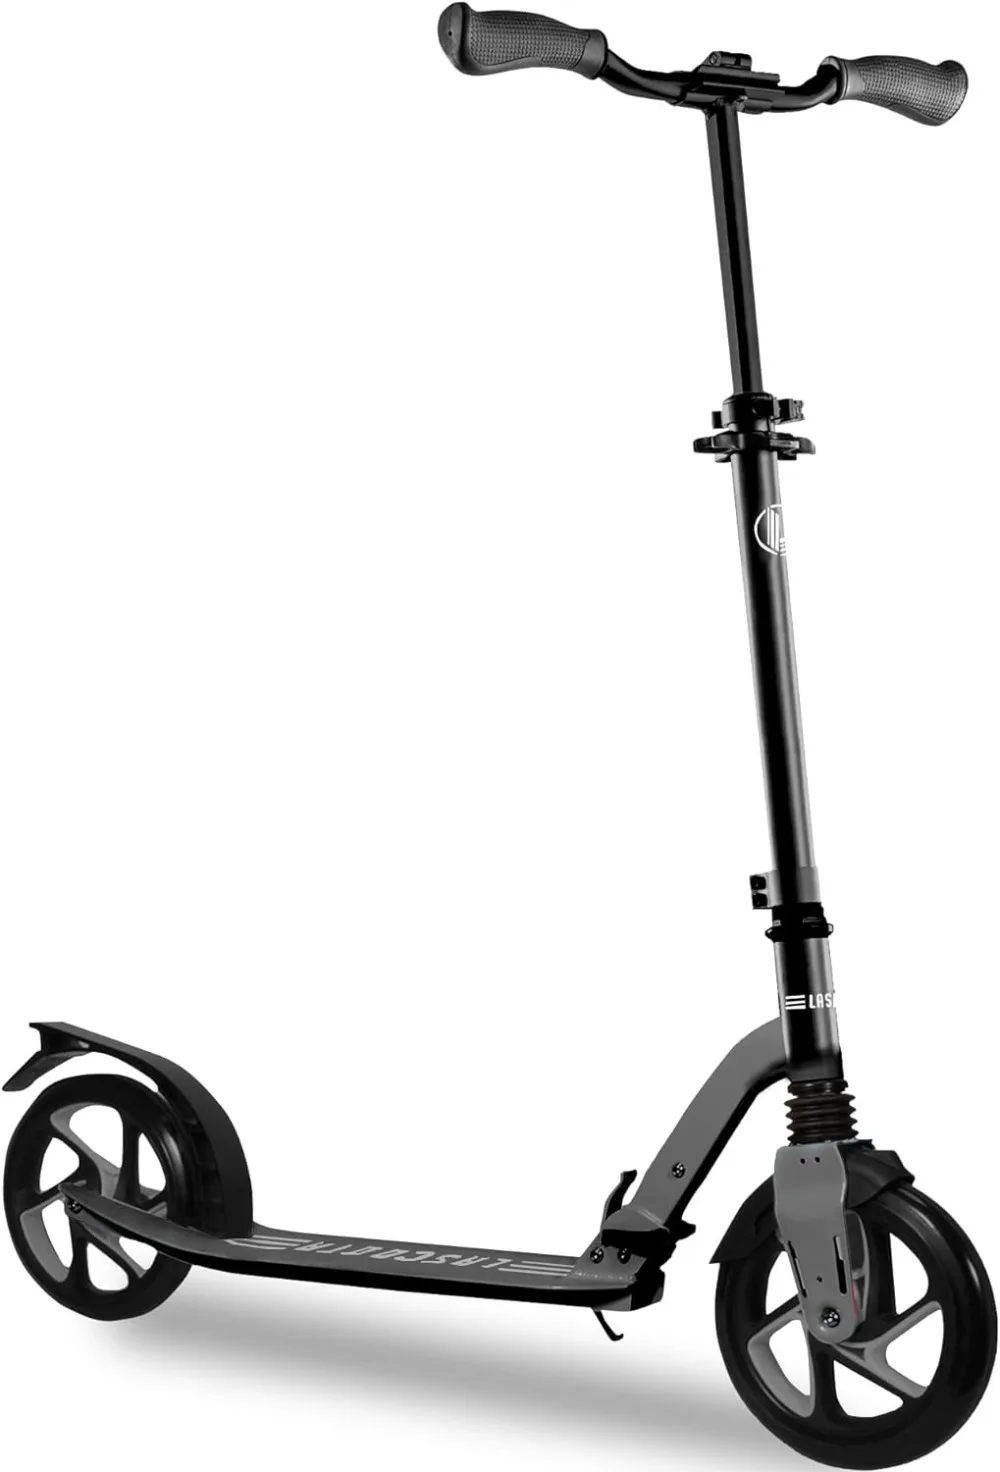 

Kick Scooter for Kids Ages 6+, Teens & Adults, Large 8" Sturdy Urethane Wheels. Adjustable Handlebar, Lightweight, Foldable